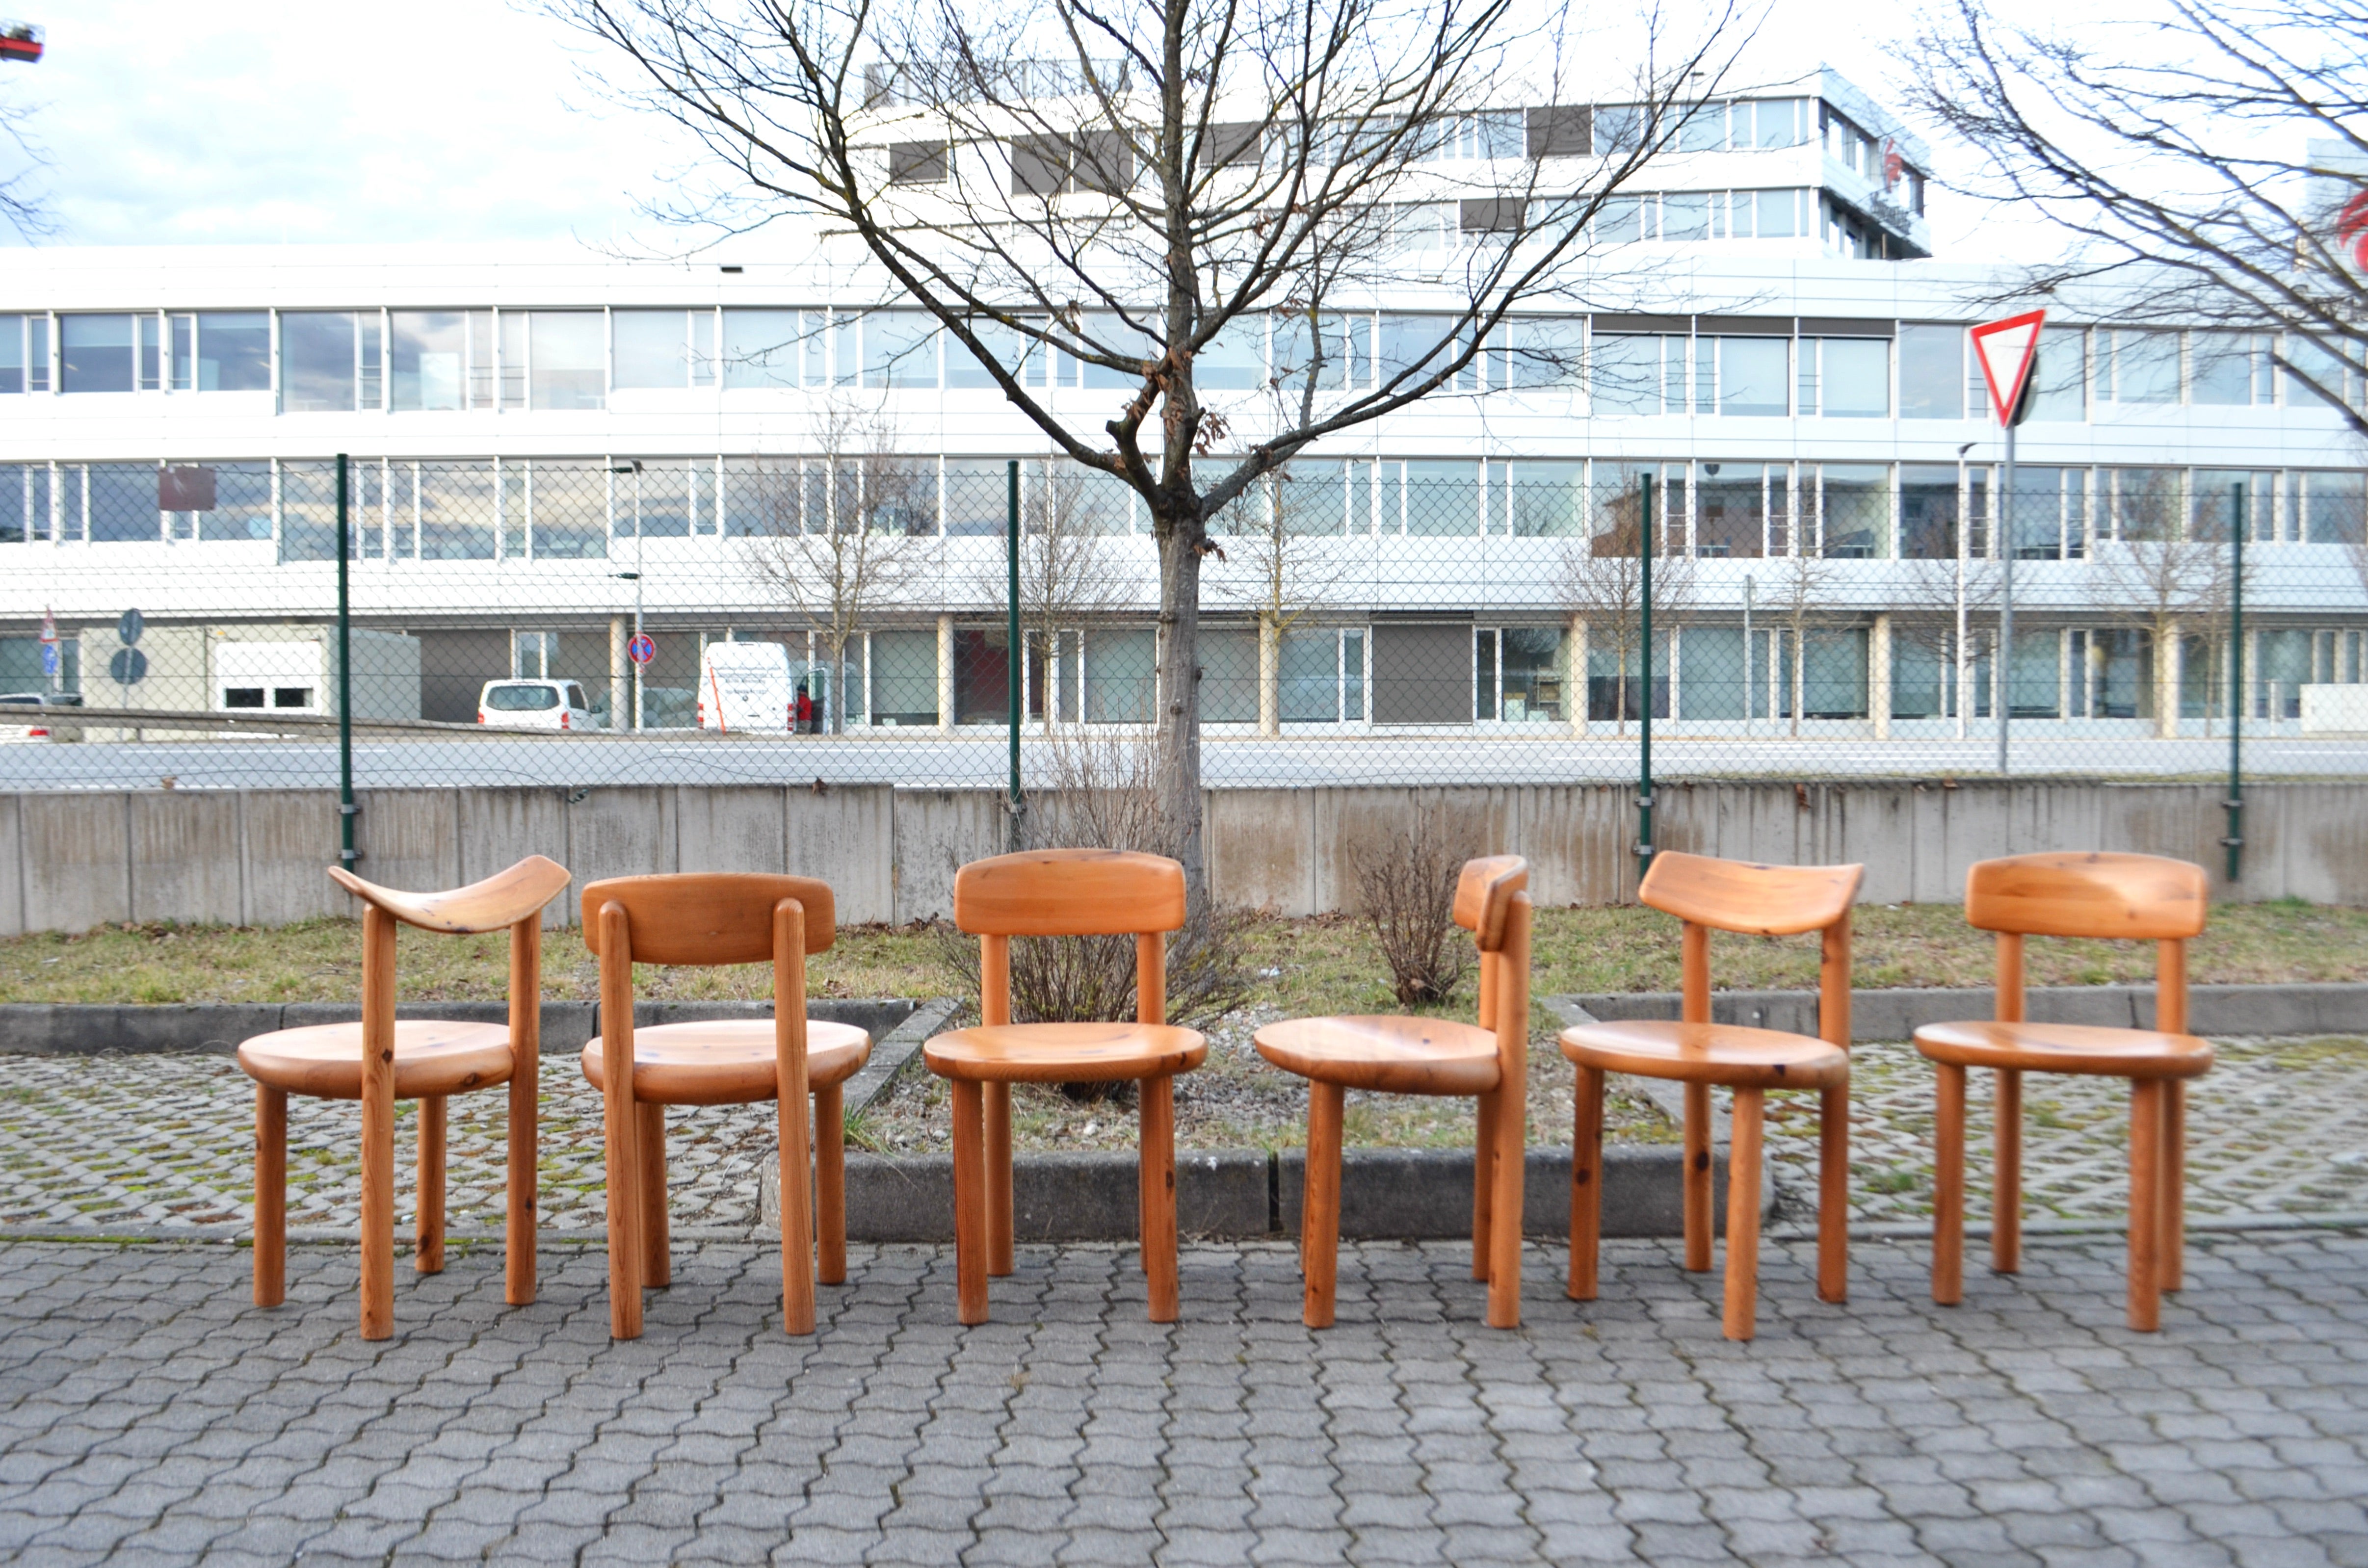 Dining chairs designed by Rainer Daumiller and manufactured by Hirtshals Savvaerk.
Model with flexible back.
Solid scandinavian pine wood.
Version is lacquered.
These chairs are very comfortable.
The seating area is perfectly shaped and the flexible